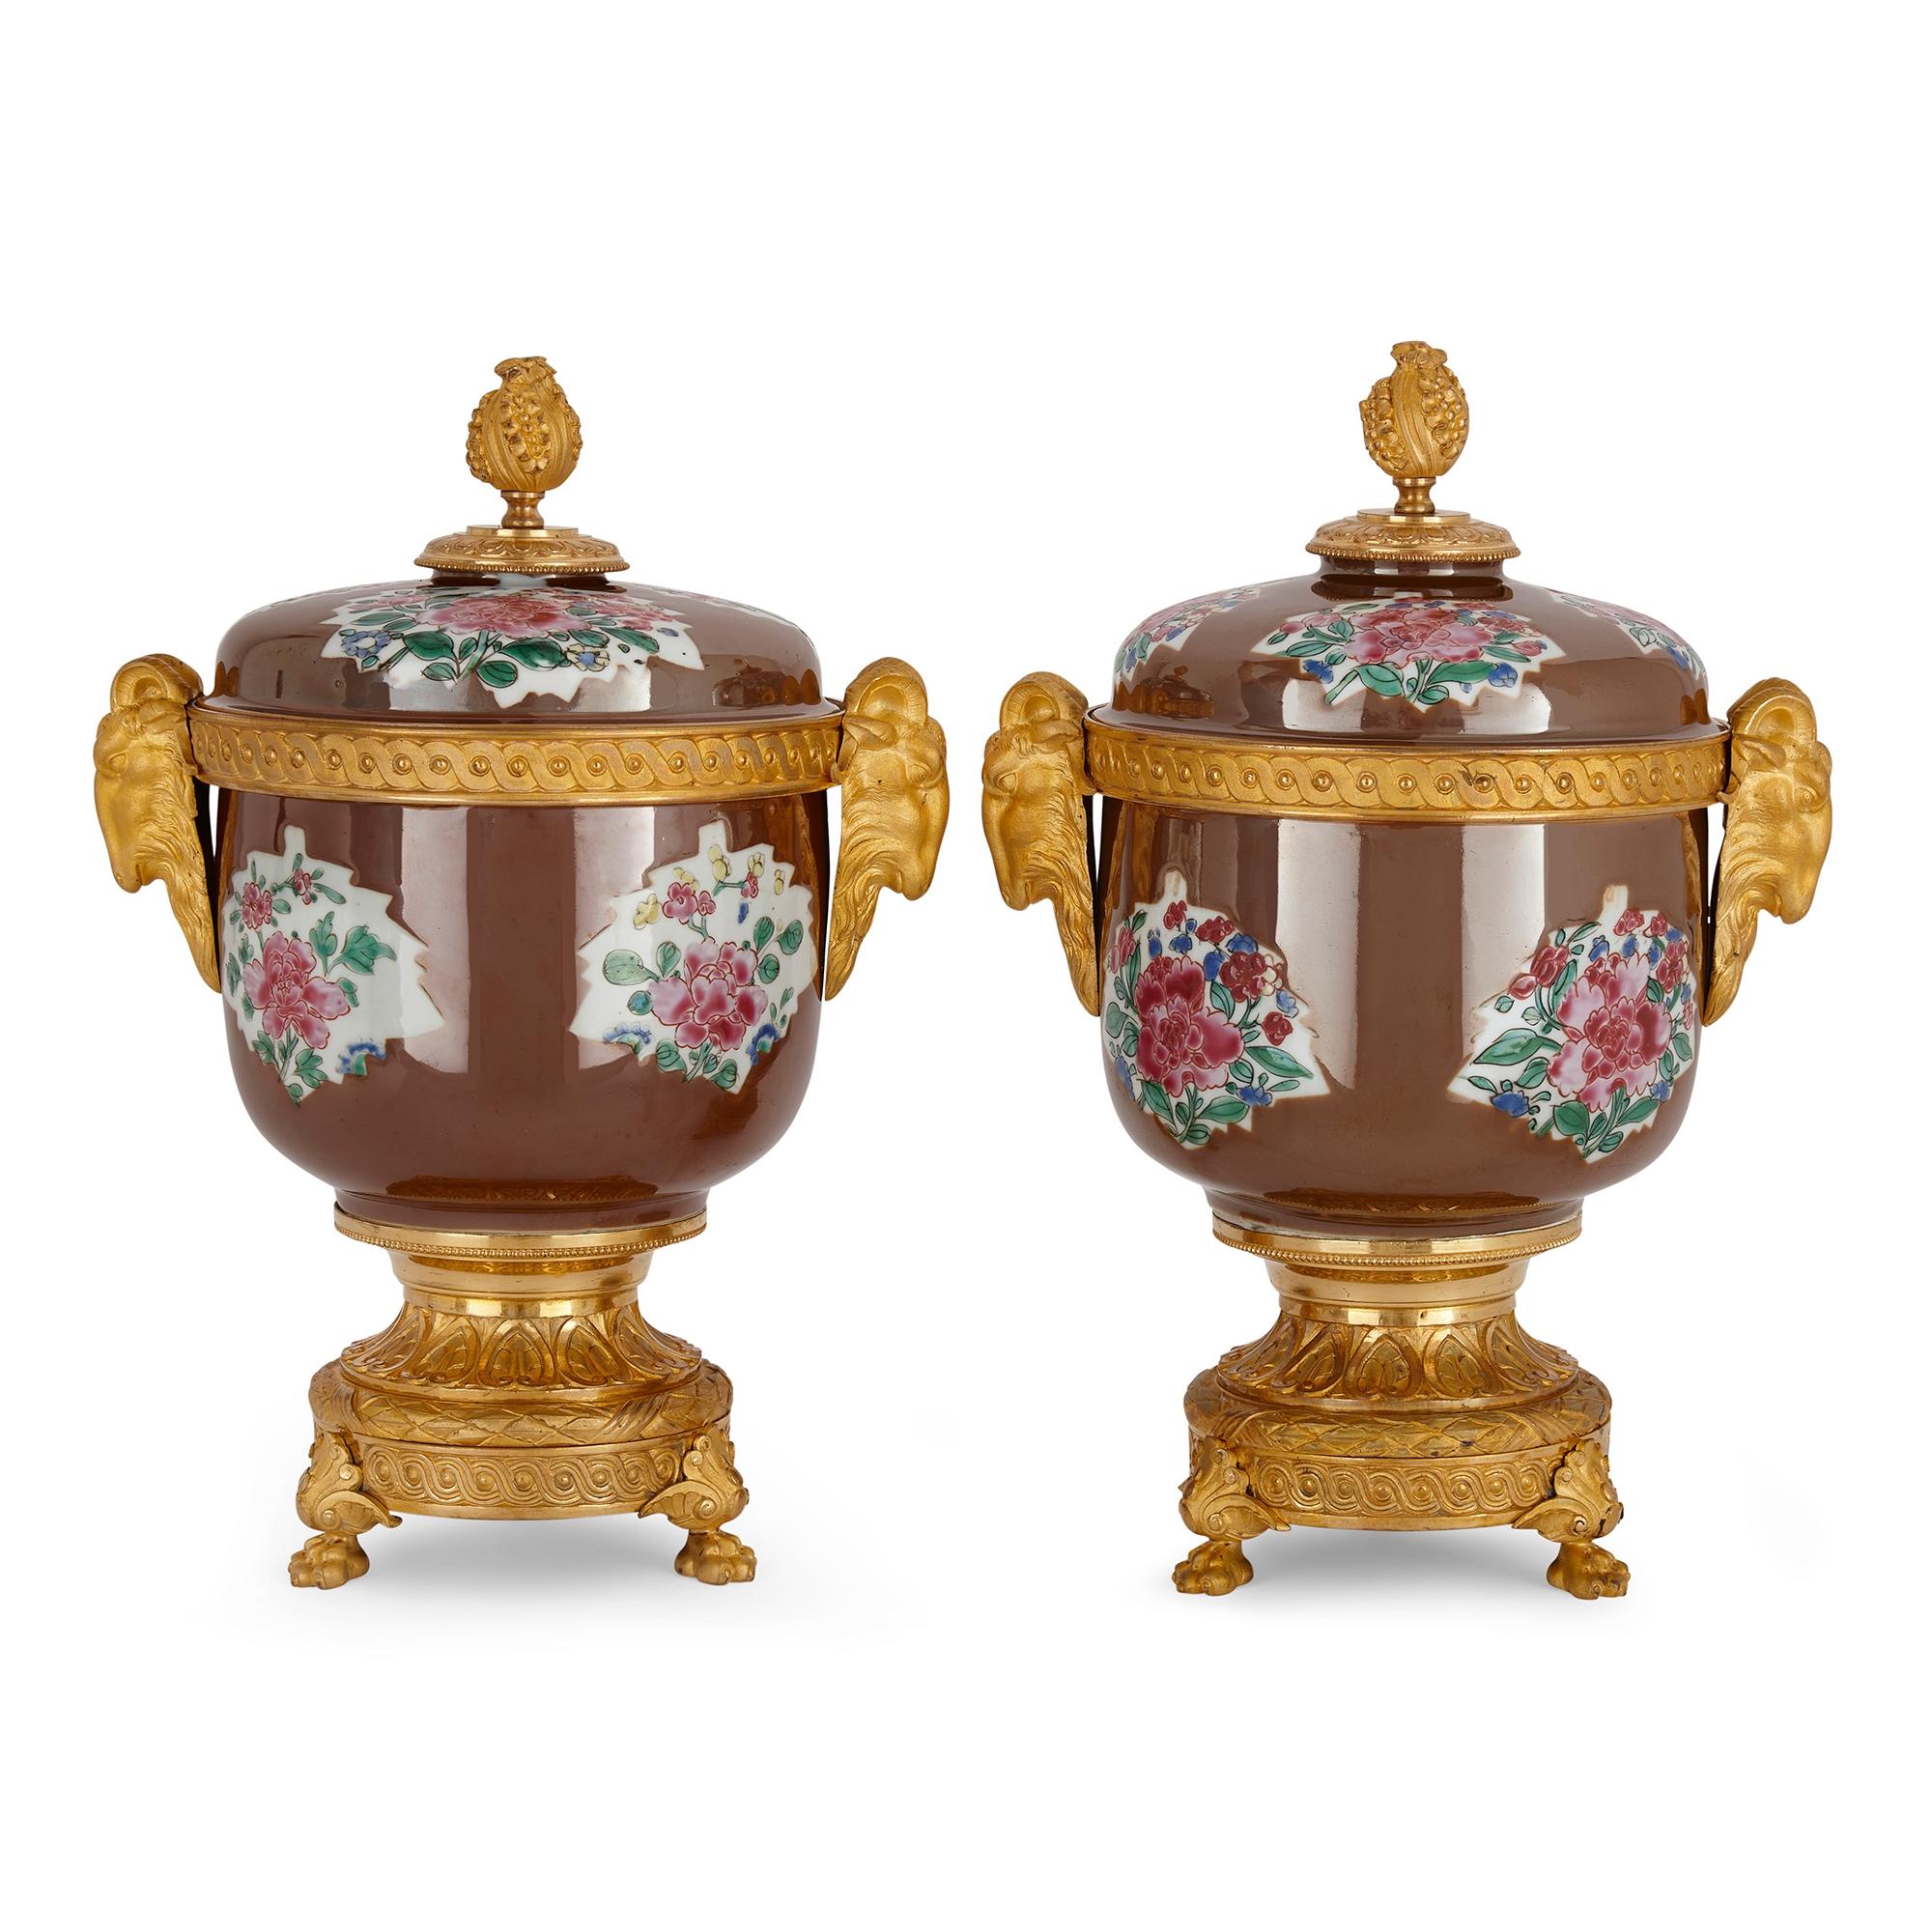 Pair of antique Chinese café au leit porcelain and ormolu vases 
Porcelain: Chinese, 18th Century 
Ormolu: French, Late 19th Century 
Height 33cm, width 23cm, depth 18cm

The porcelain vases were hand made in 18th century China, while the ormolu